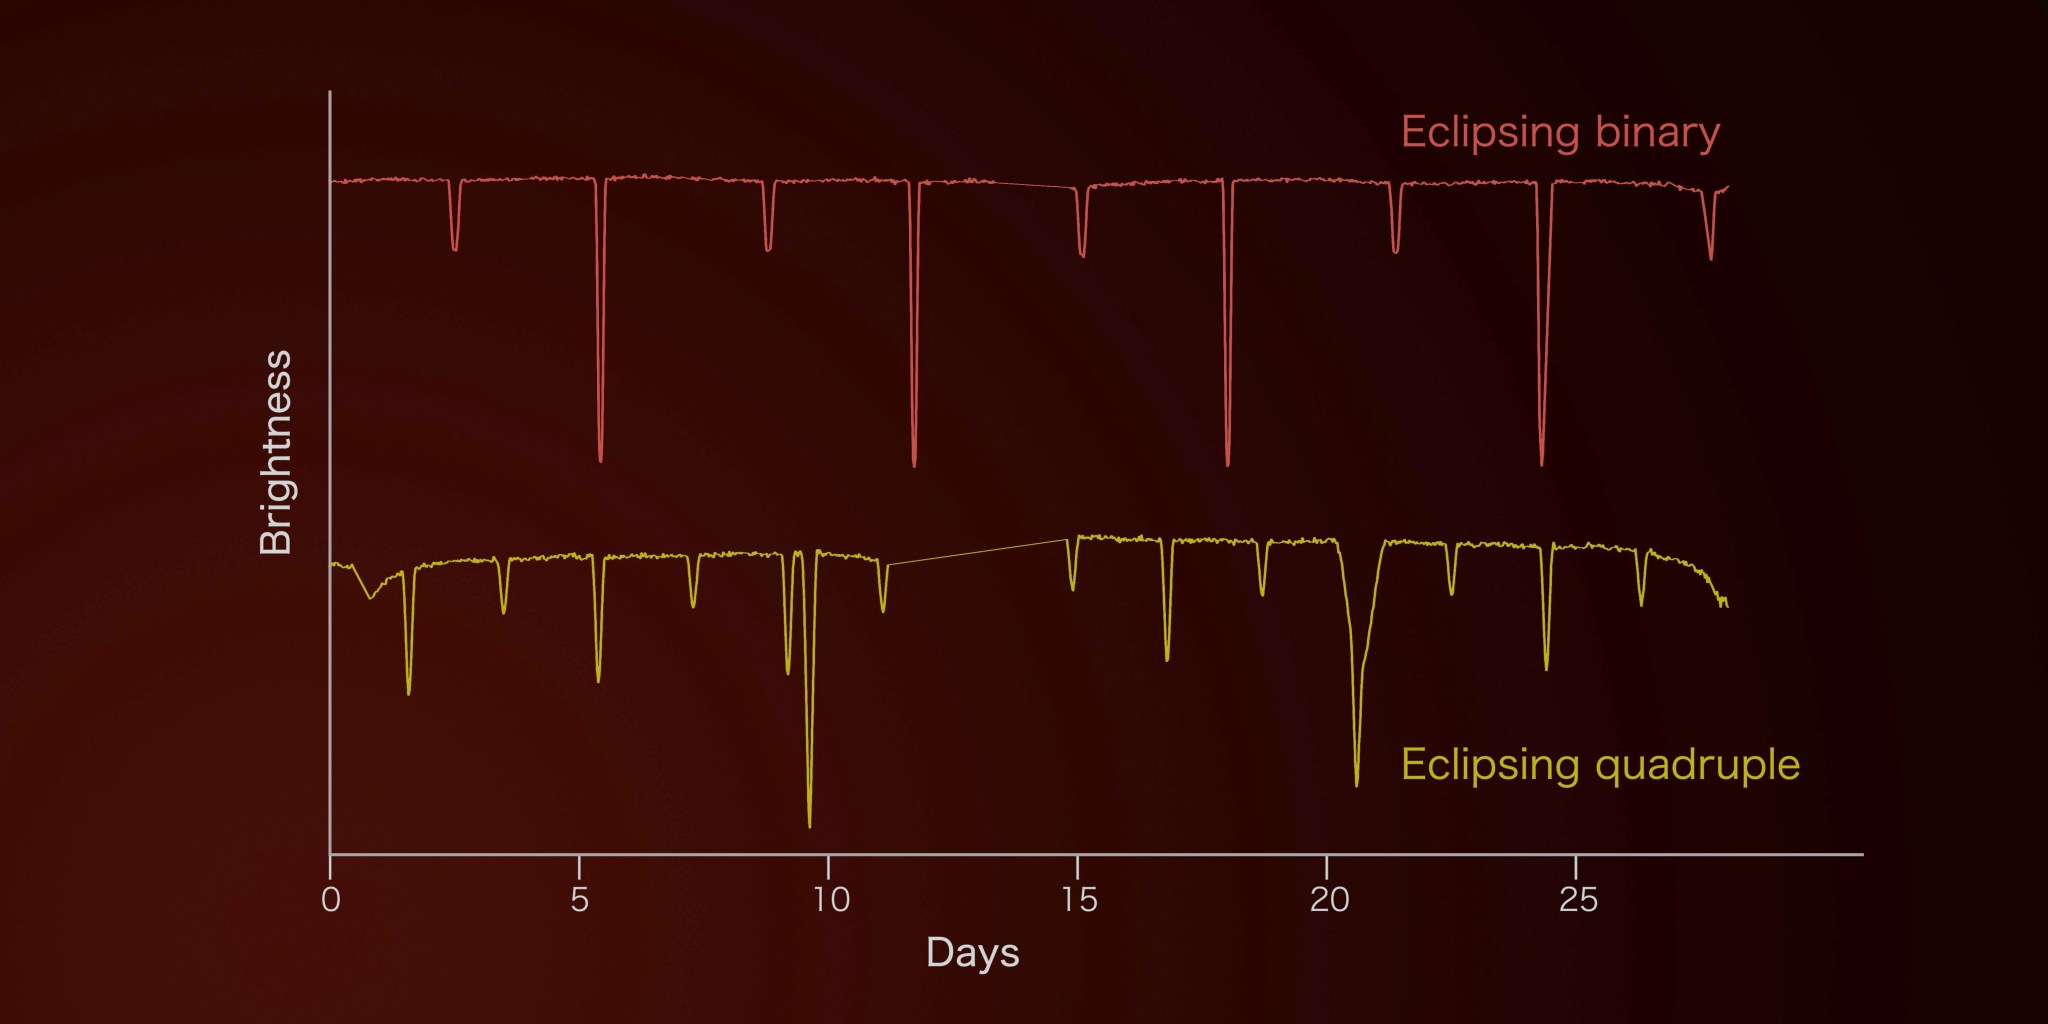 Graph of brightness to days to find eclipsing stat systems. The X axis ranges from 0 to 25 days and there are two variables. "Eclipsing binary" is in red on top and  "Eclipsing quadruple" is in yellow on the bottom. There are sharp spikes down in brightness every few days. 